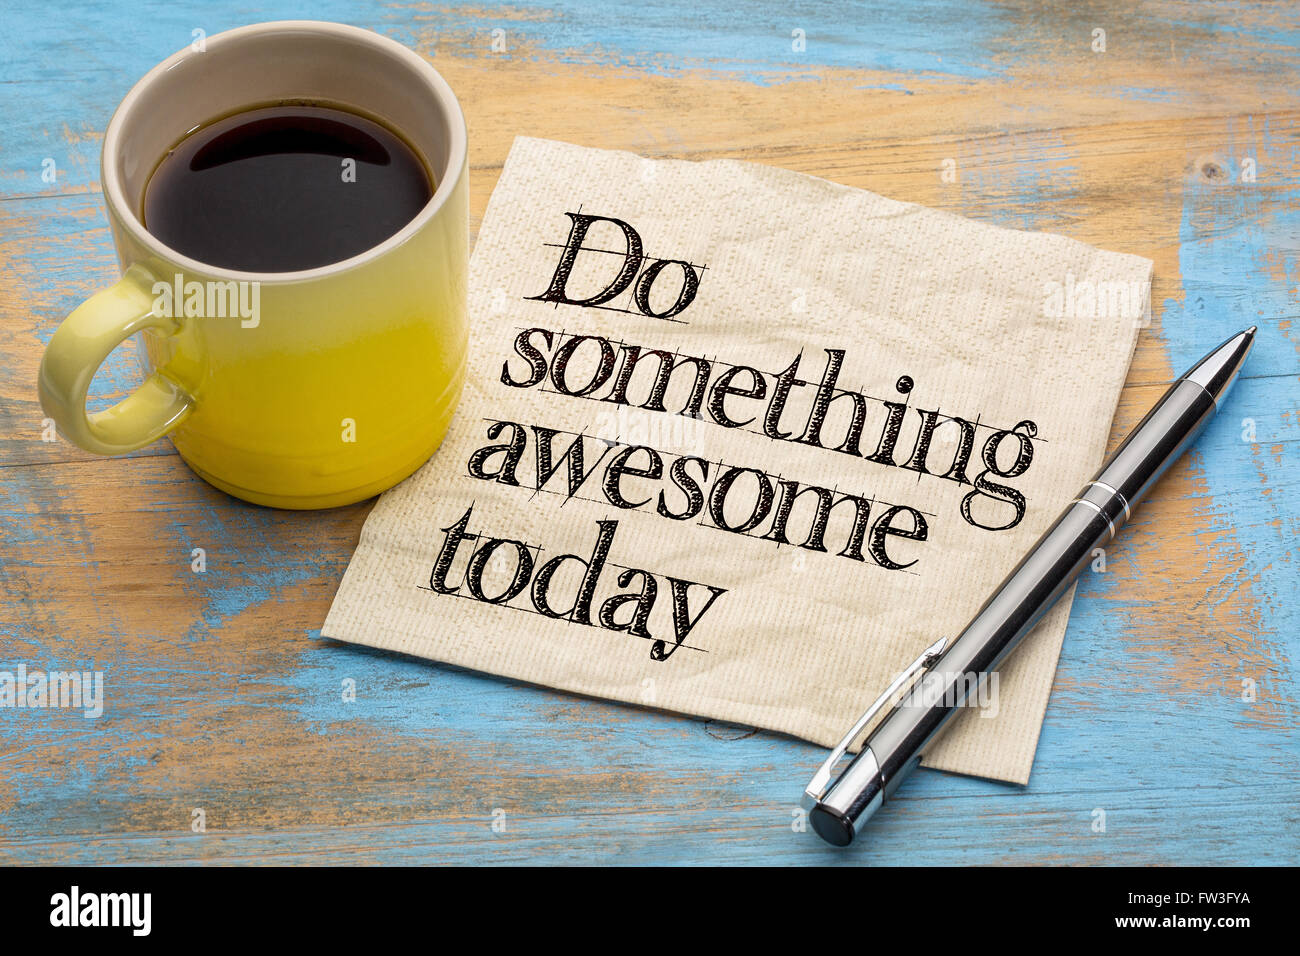 do something awesome today - advice or reminder - handwriting on a napkin with a cup of coffee Stock Photo